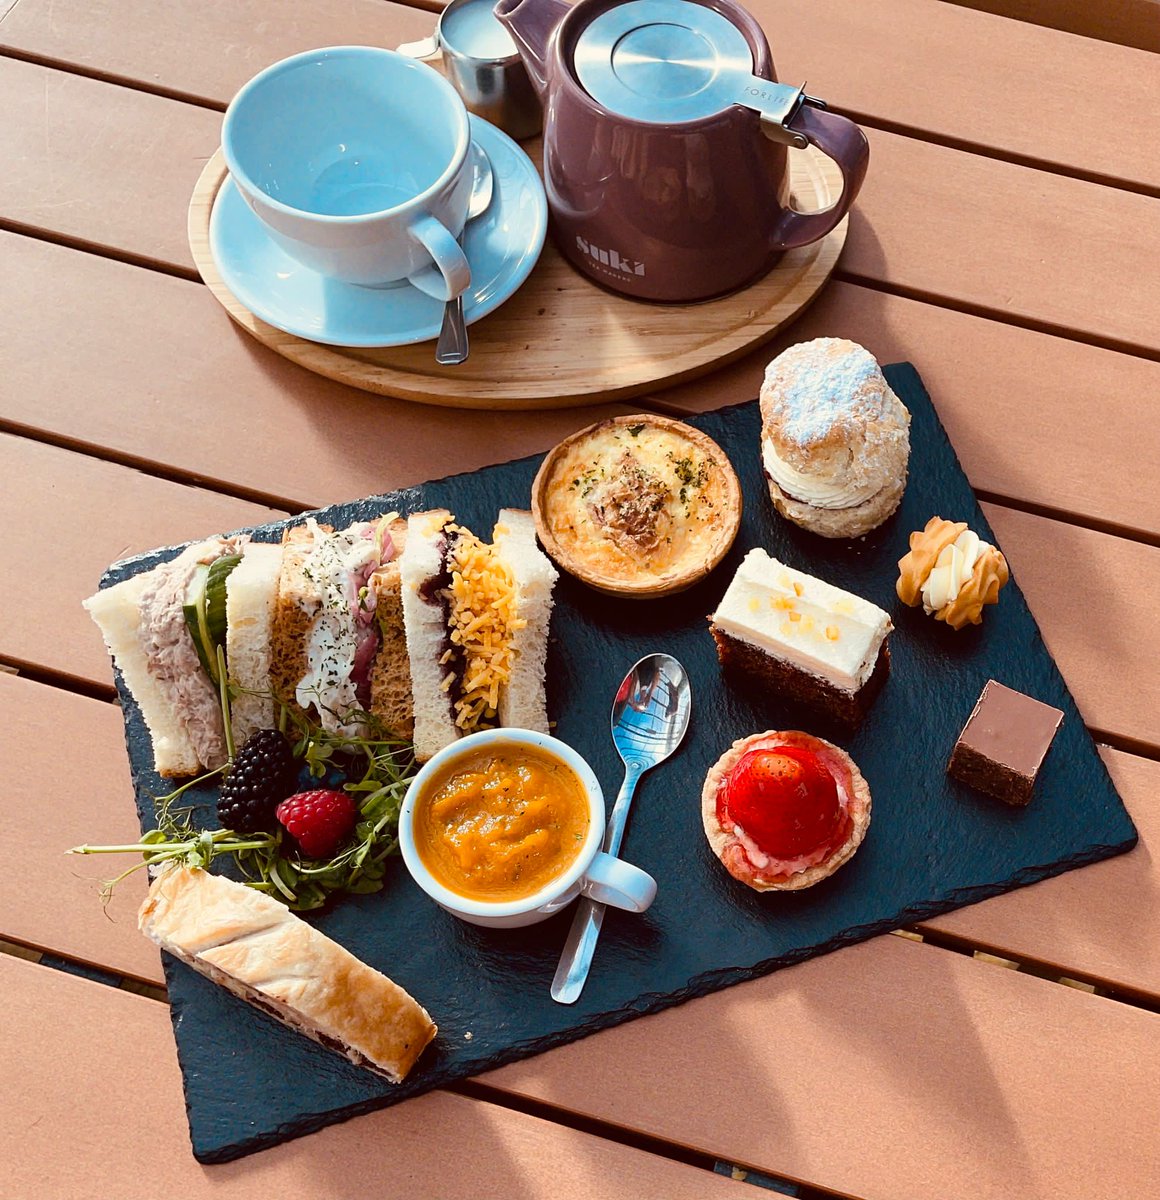 Beat the January blues with our delicious afternoon tea. Capturing the essence of local flavours, each bite is a delicious celebration of our commitment to good food. Available to sit in or takeaway. Call 01561 321155 to book. #afternoontea #dogfriendly #stonehaven #aberdeenshire